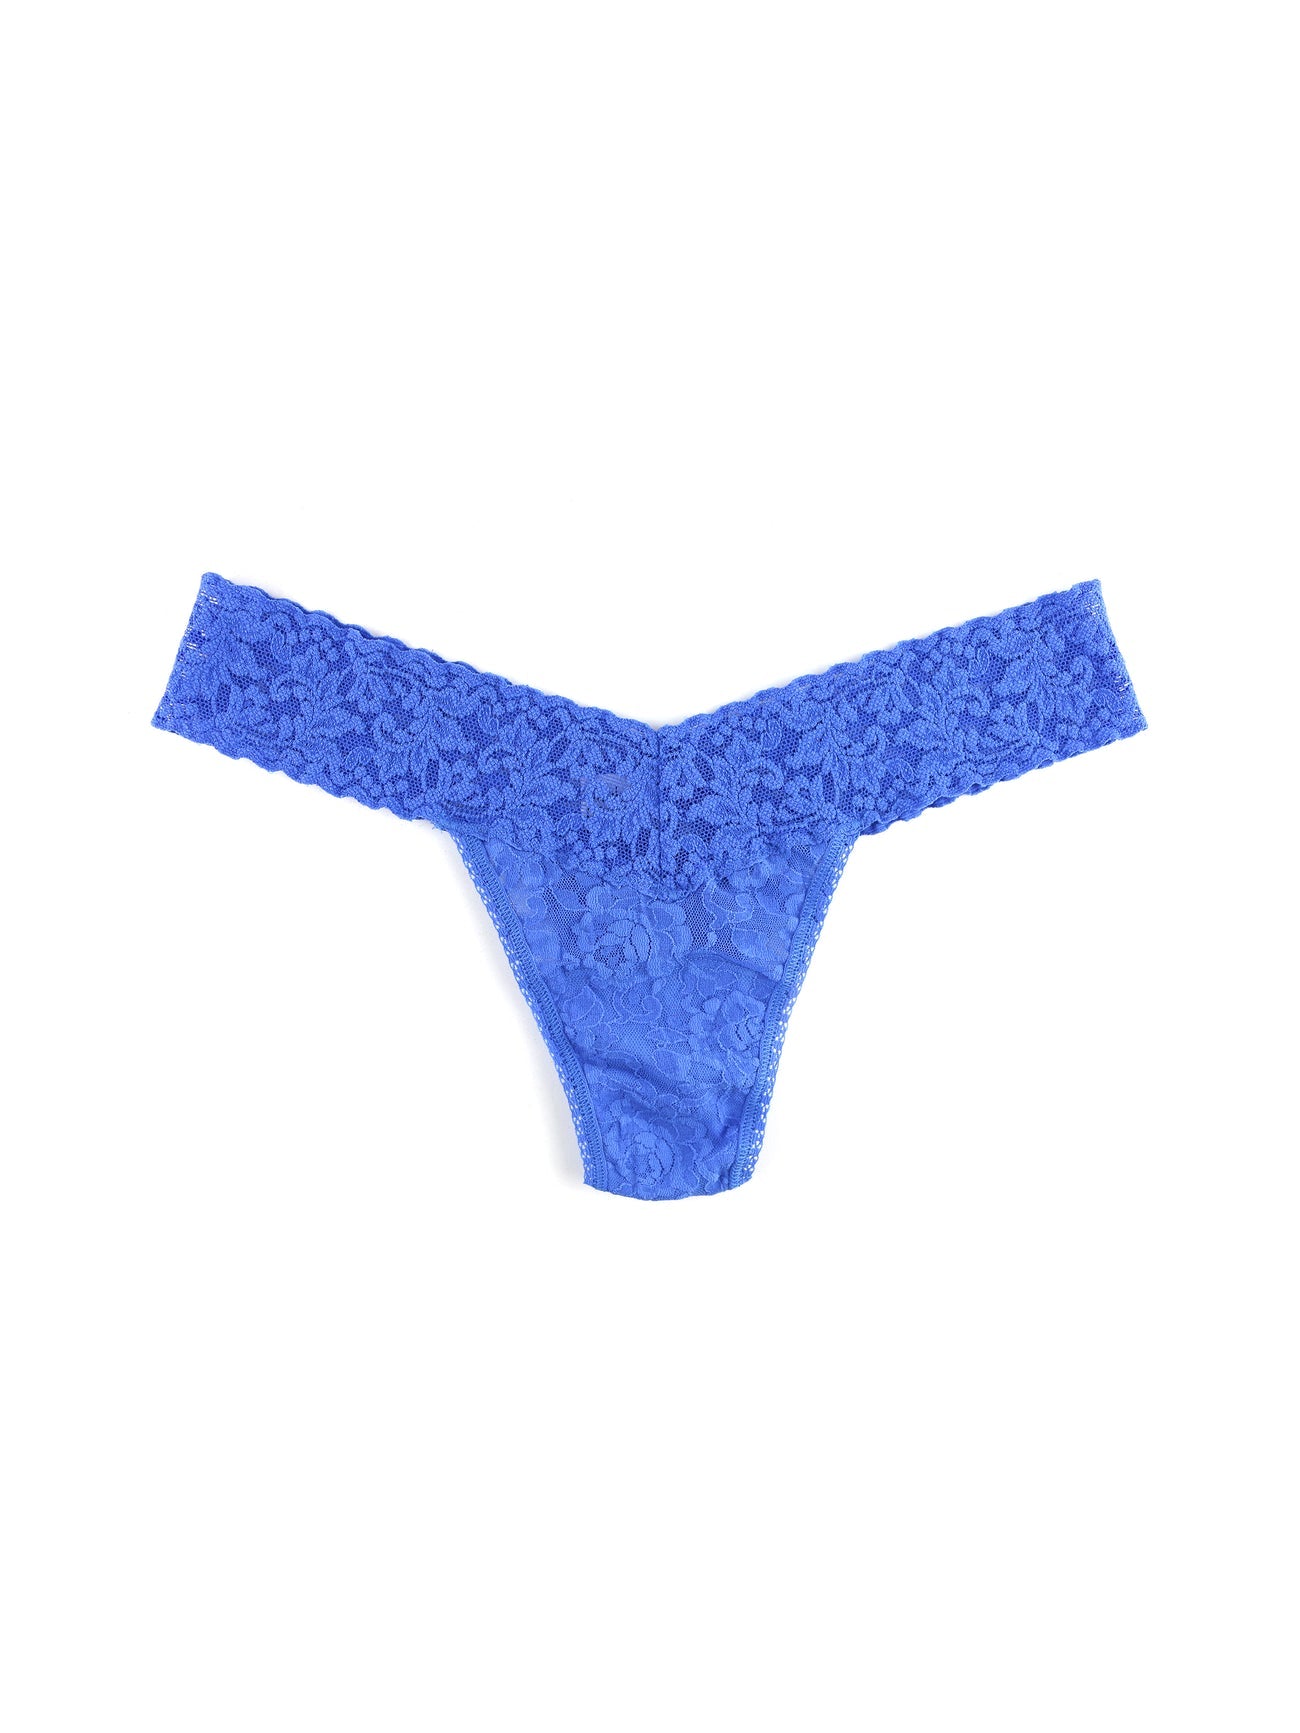 Buy sea-blue Hanky Panky Signature Lace Low Rise Thong - Packaged 4911p